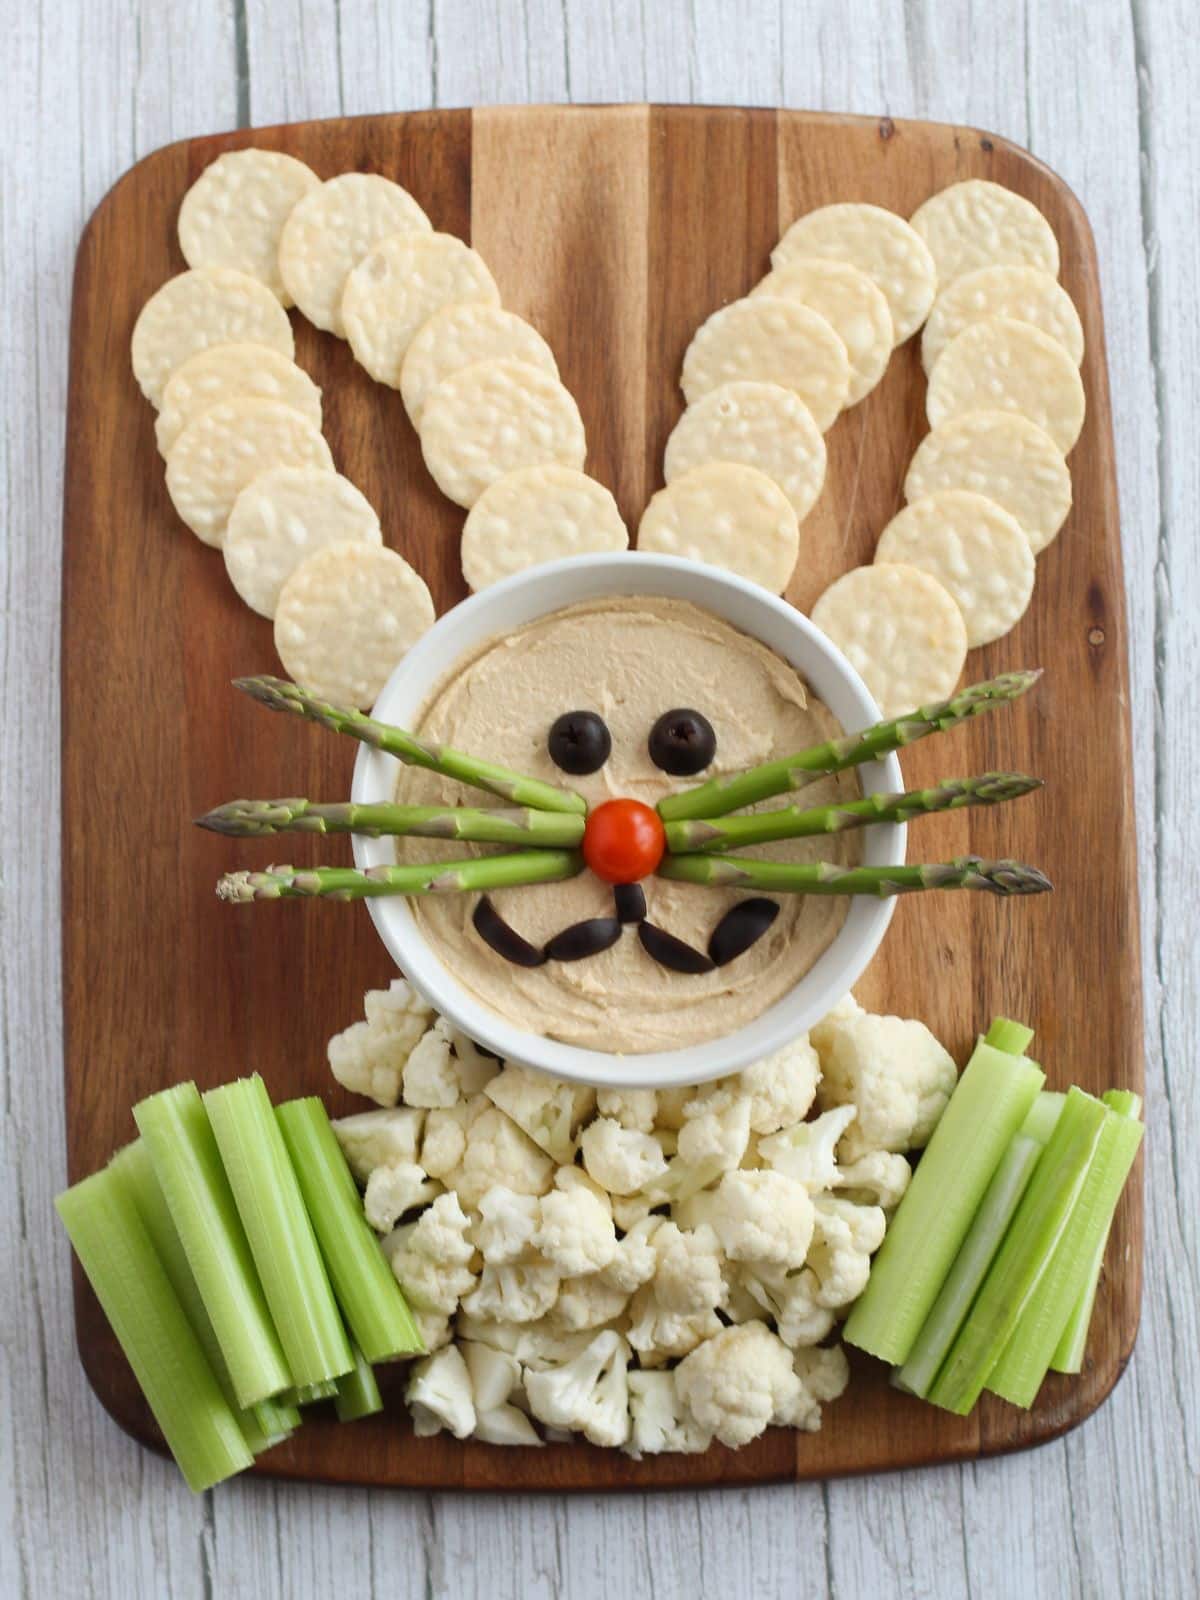 Celery and cauliflower added to the bunny face.